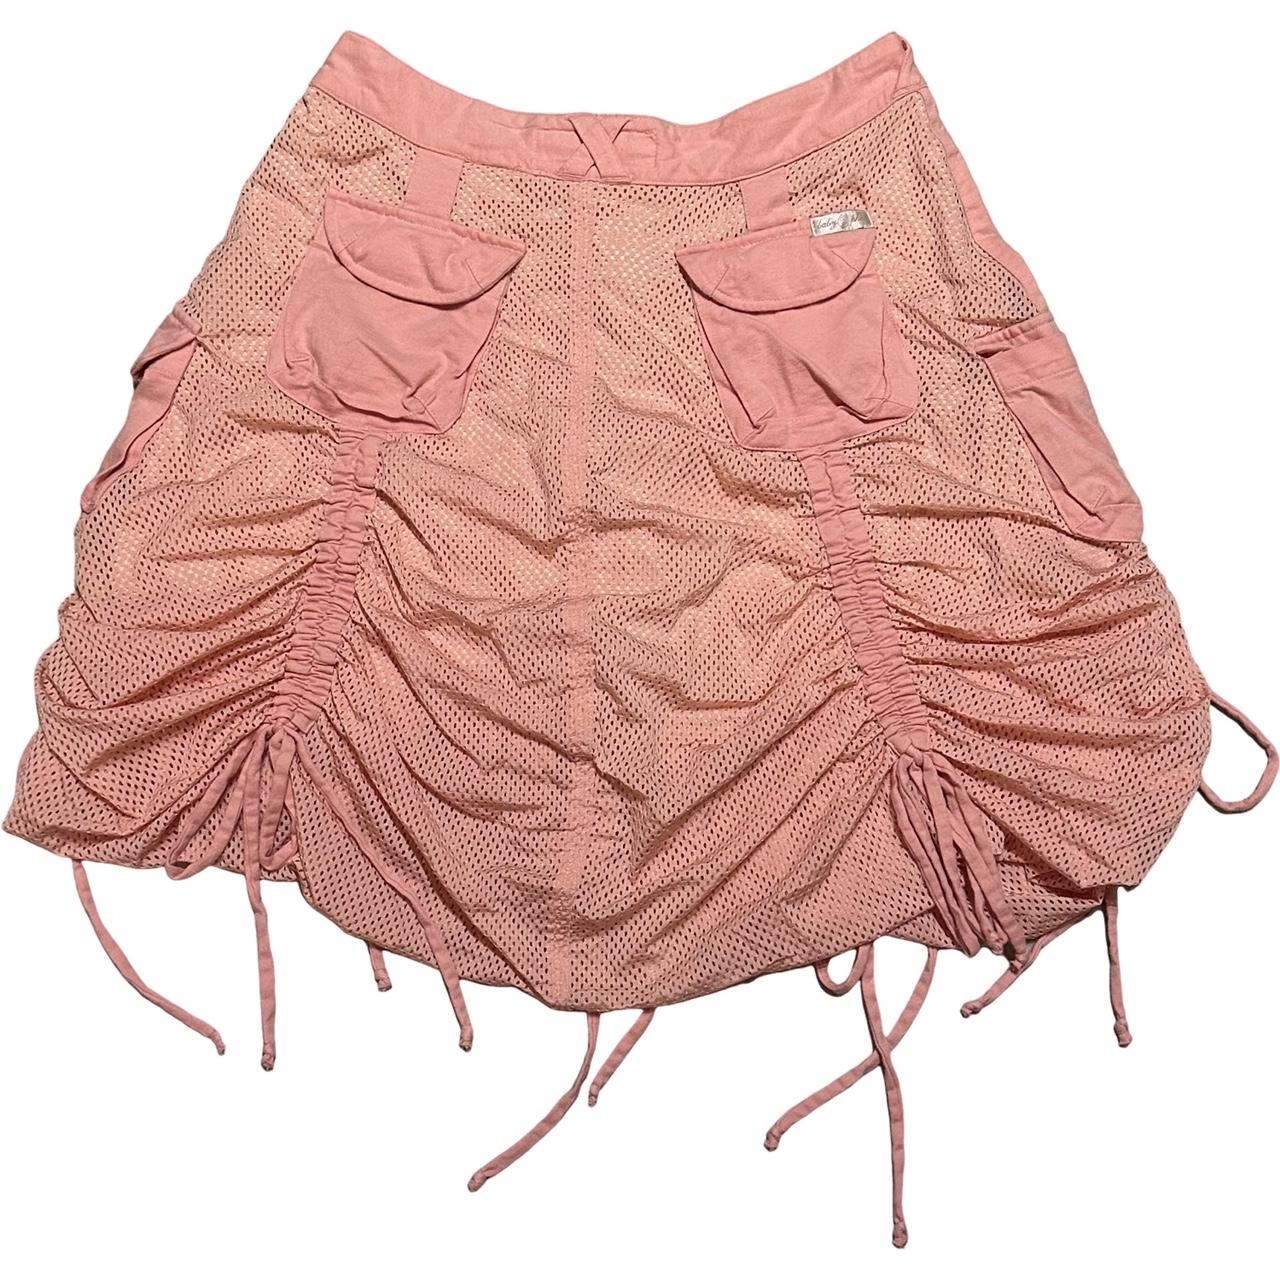 Baby Phat Mesh And Bow detail skirt